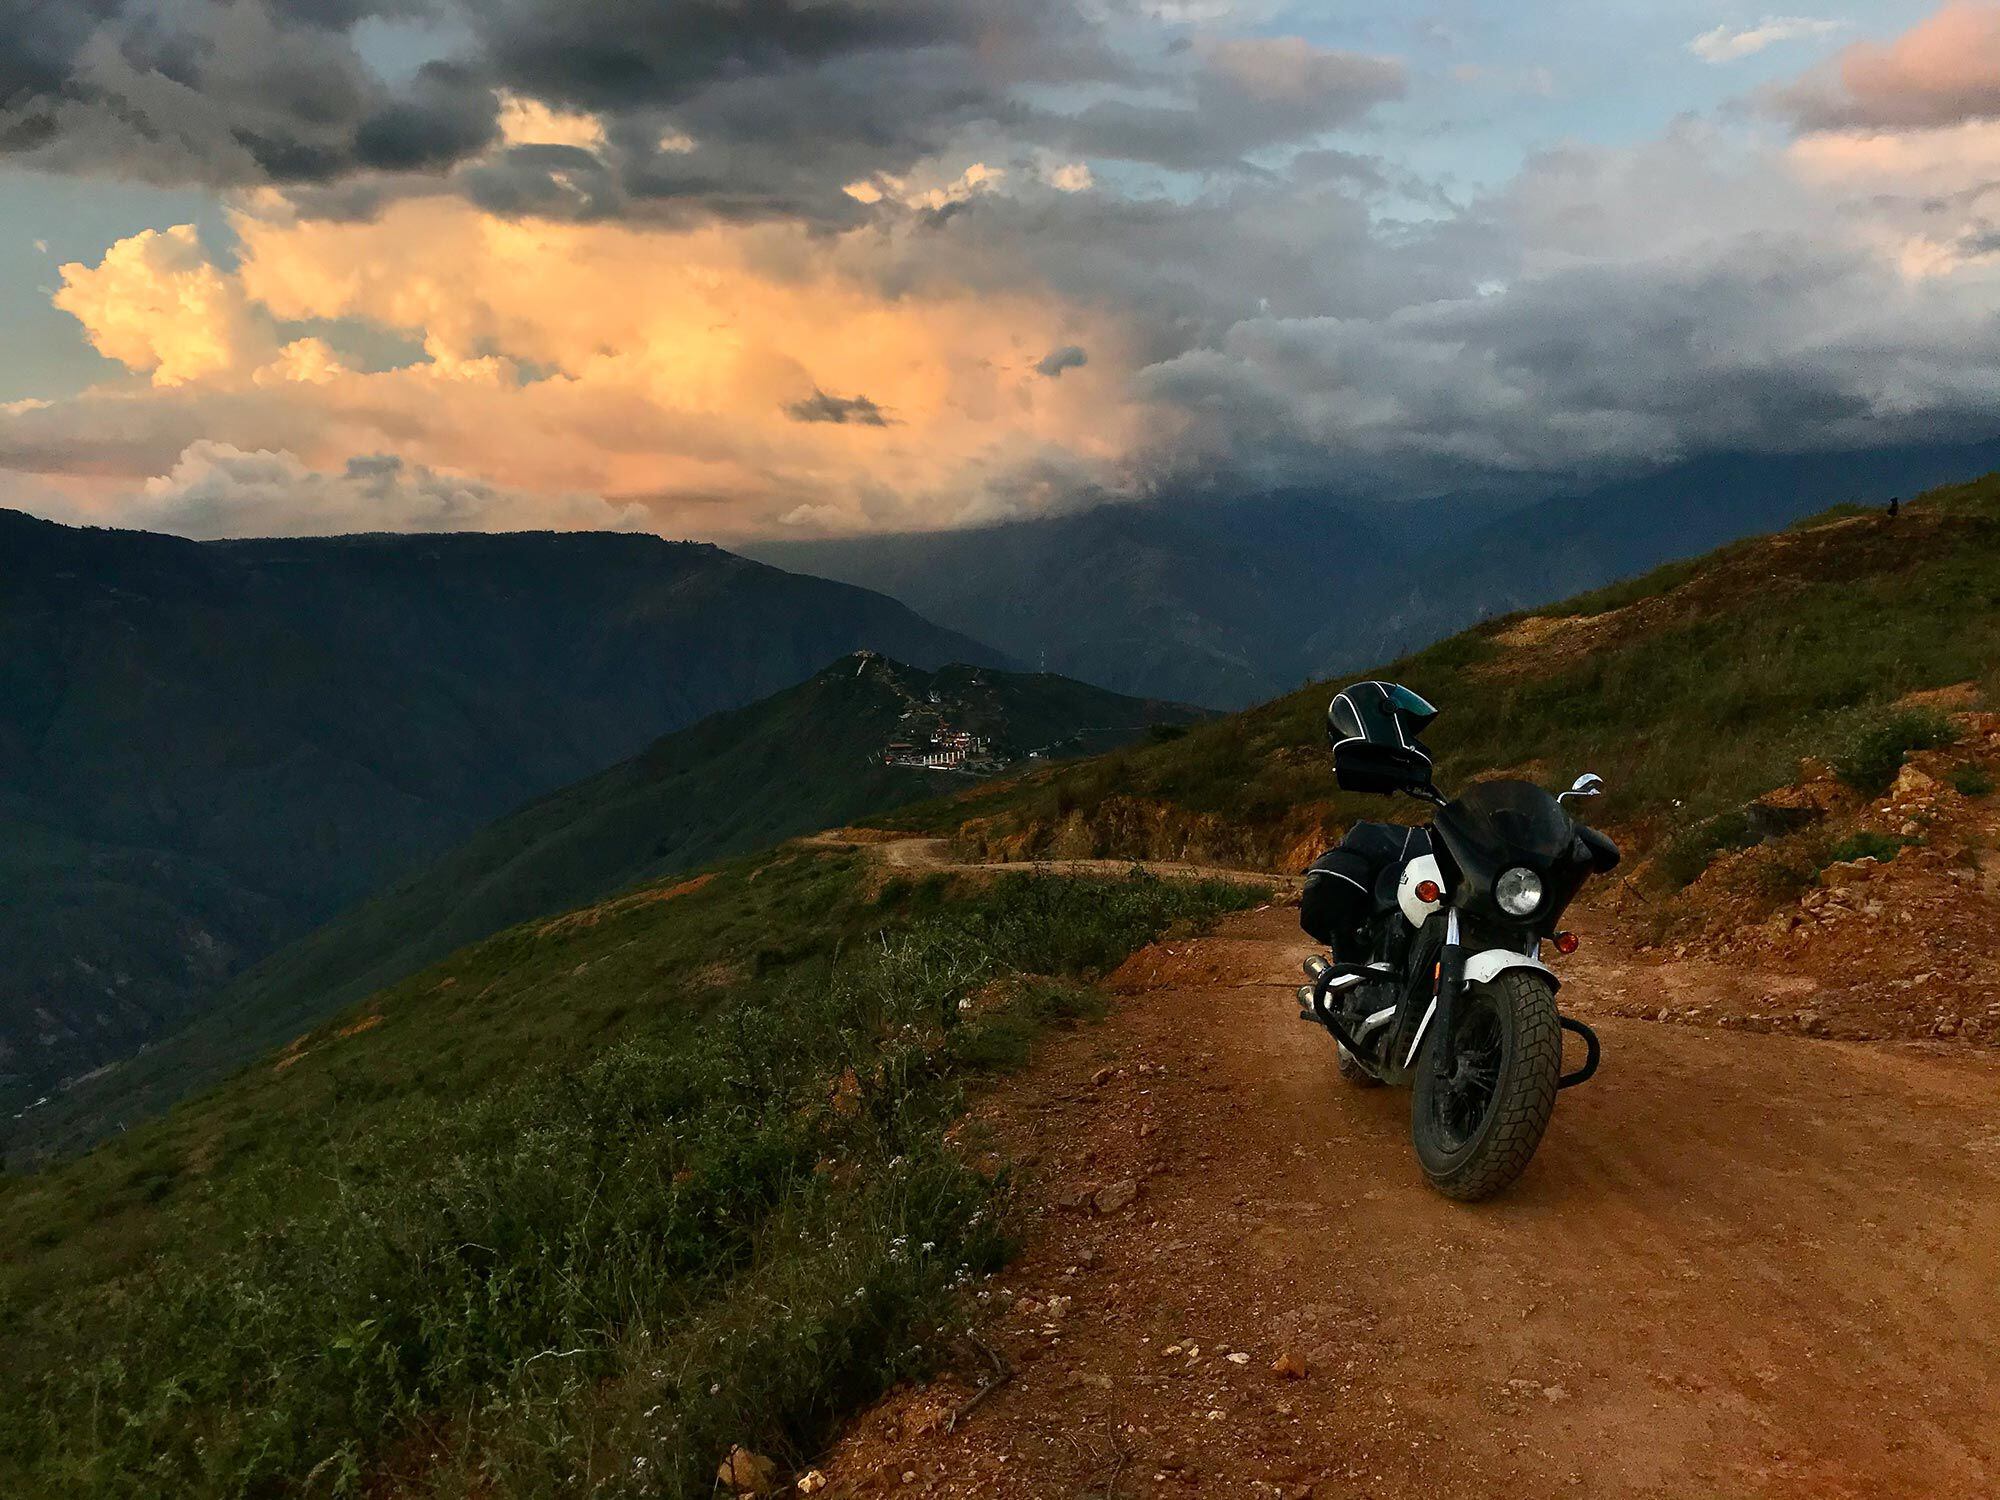 You don’t have to stray far from the main route to find wonderful dirt roads to explore, such as this one near the ridgeline and Chicamocha National Park entrance.